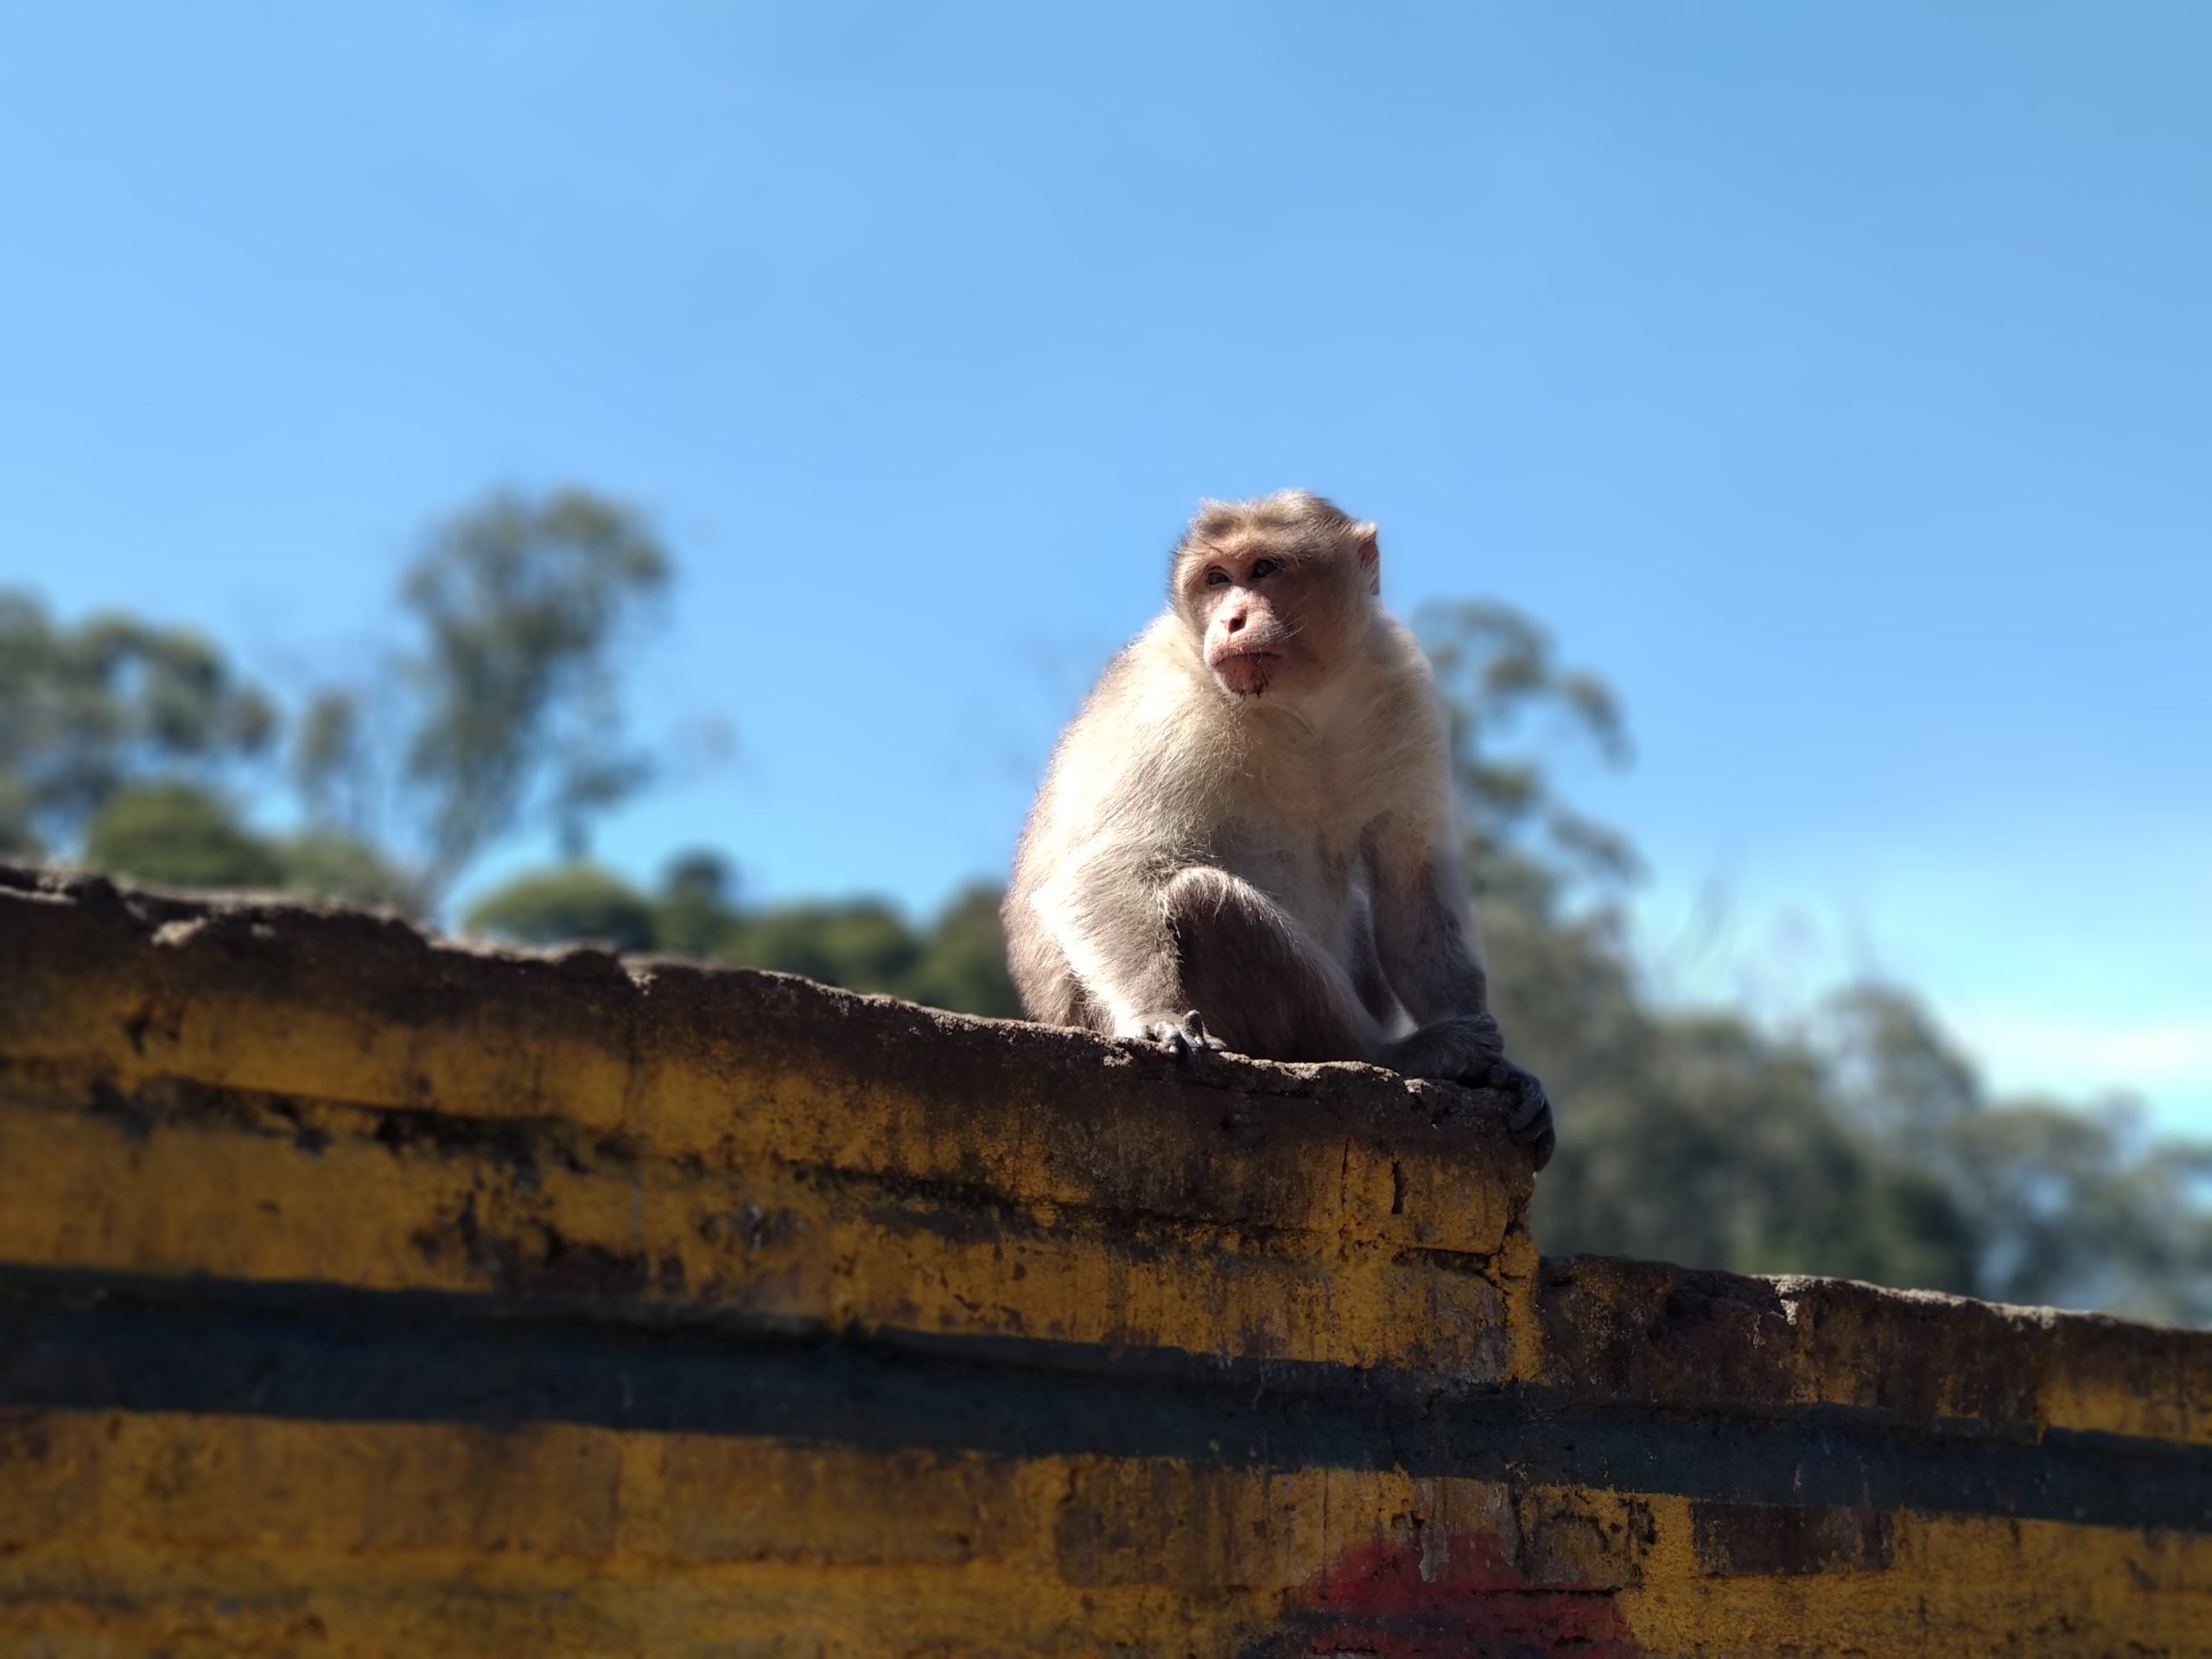 A monkey on rooftop